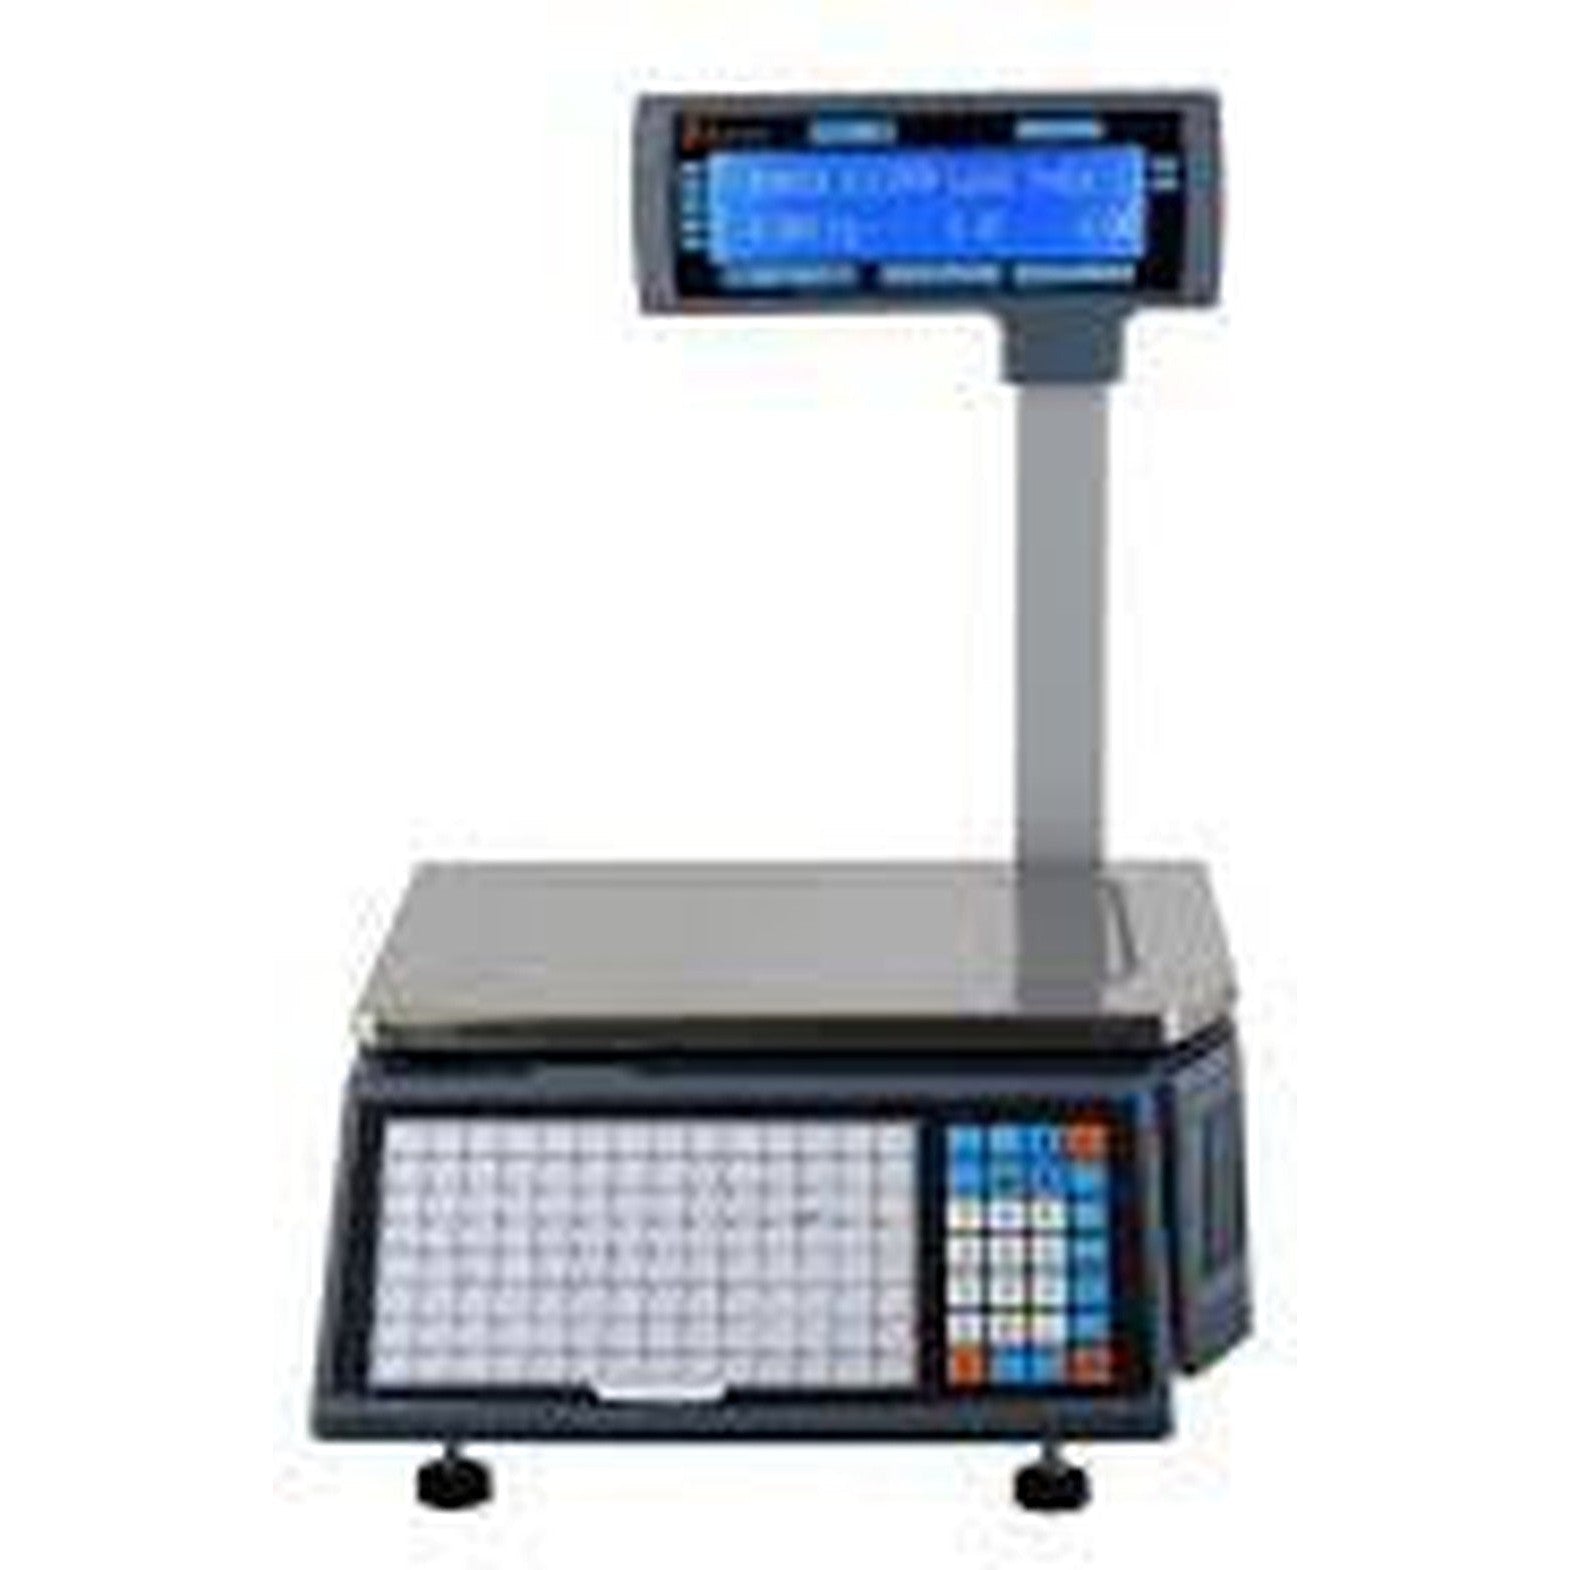 Rongta Rls1100 Label Scale-Barcode/POS Printers-Other-Star Light Kuwait